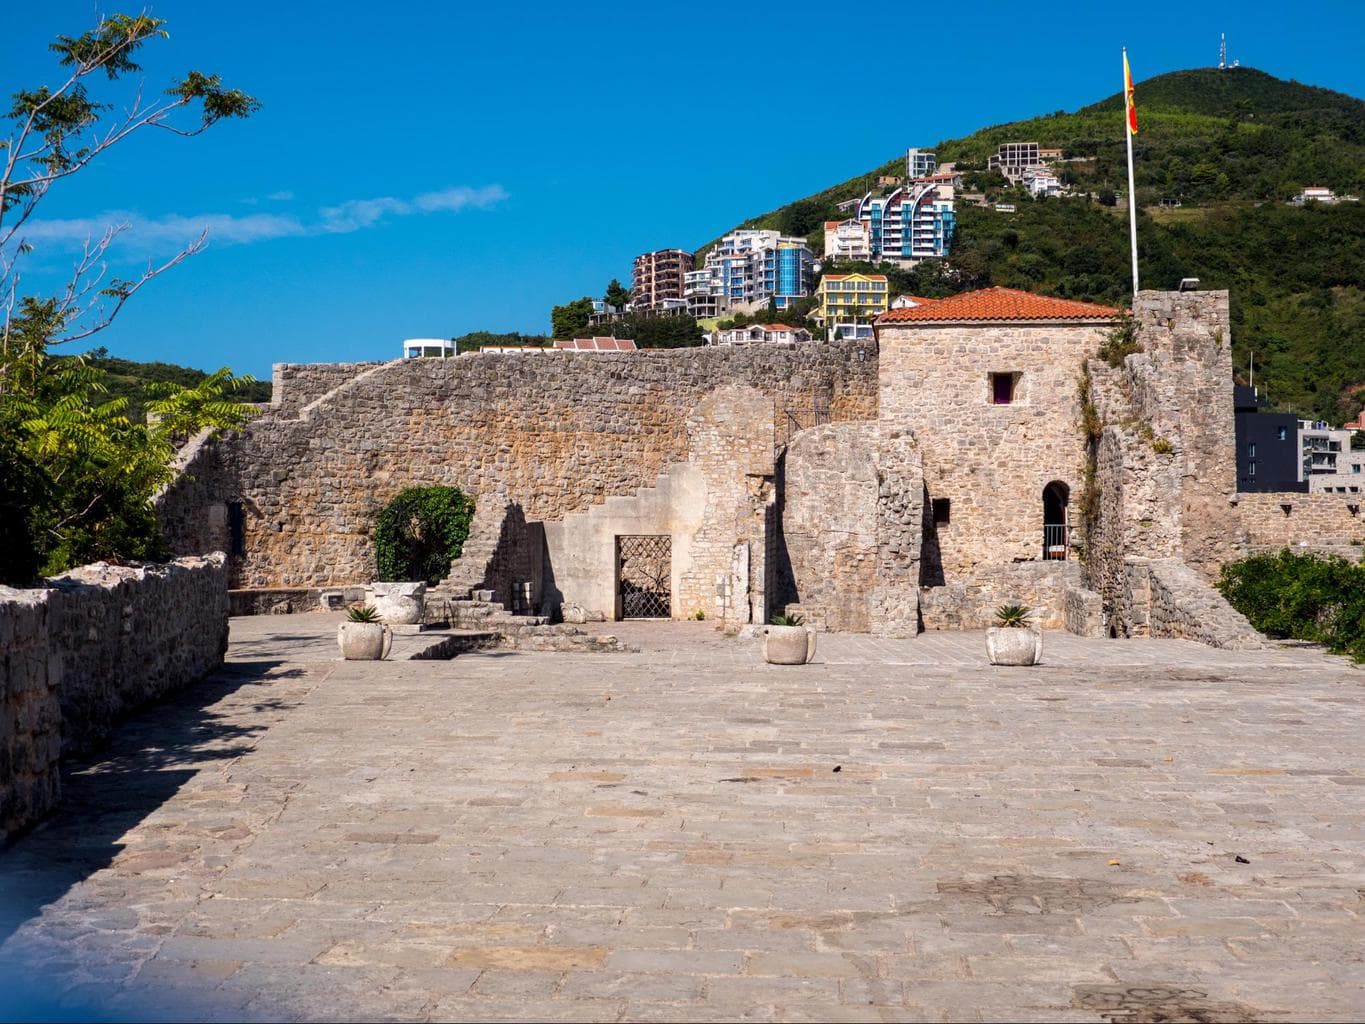 Remains of the old castle inside Budva’s Citadel